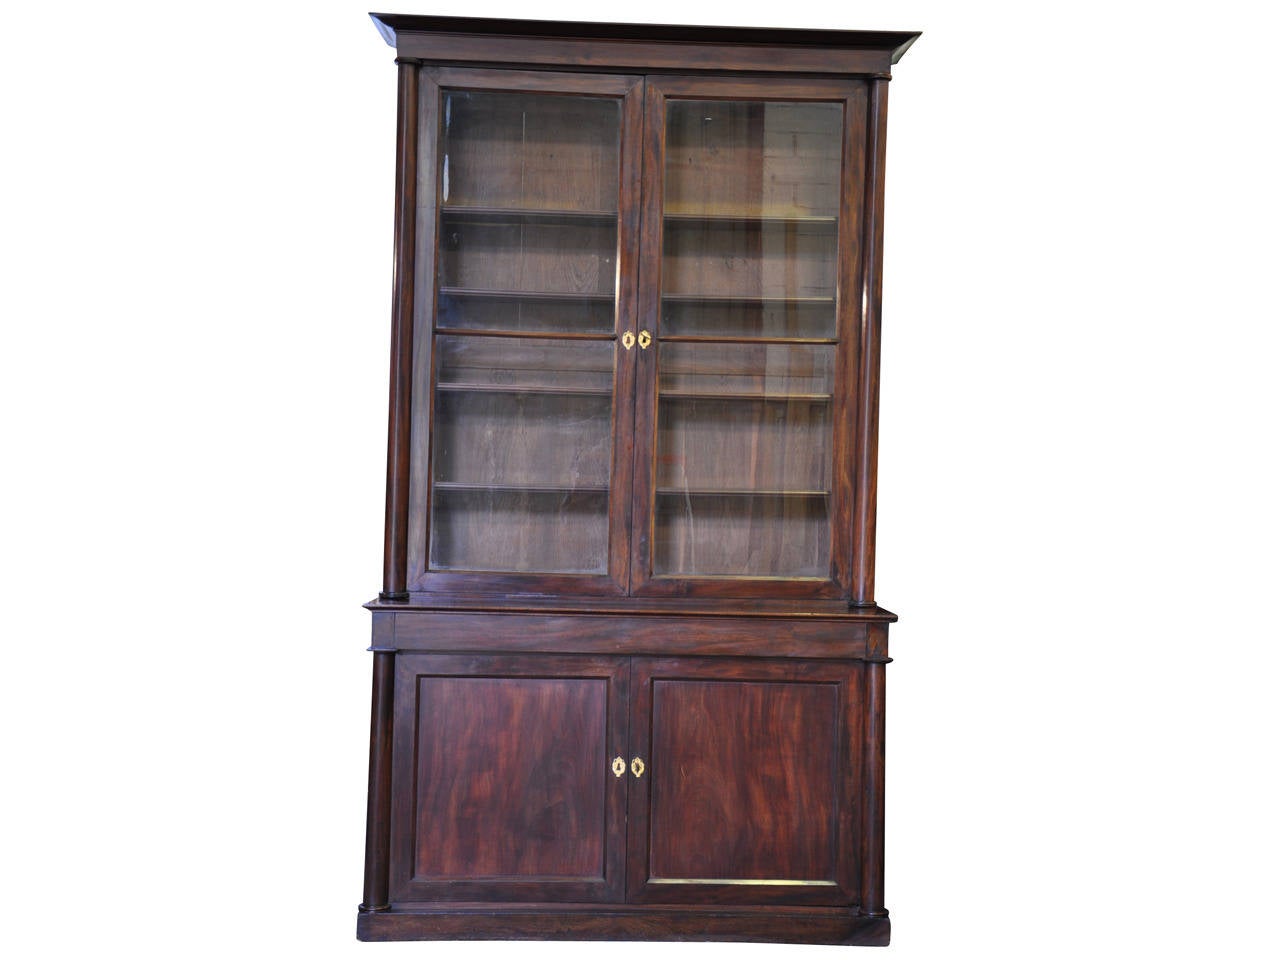 A stunning 19th century French Empire period bookcase constructed from mahogany. The large-scale and clean lines of this piece, along with the original wavy glass and wonderful grain patterns, indeed make this cabinet a true statement piece.